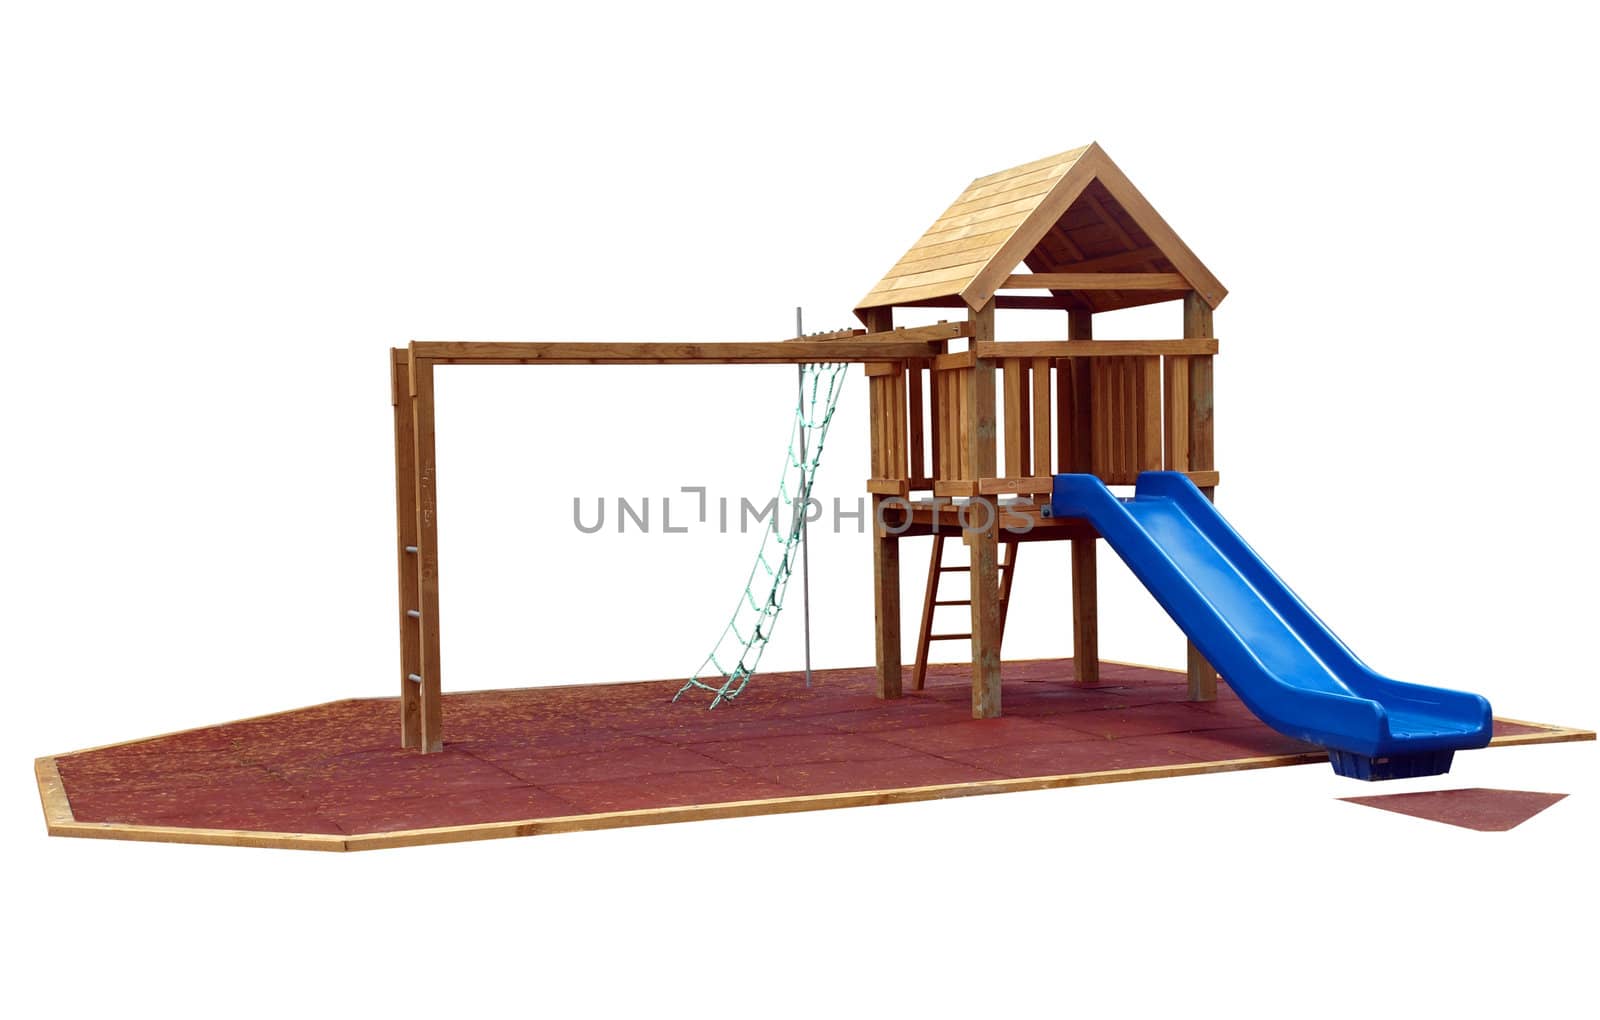 Childrens play equipment isolated with clipping path